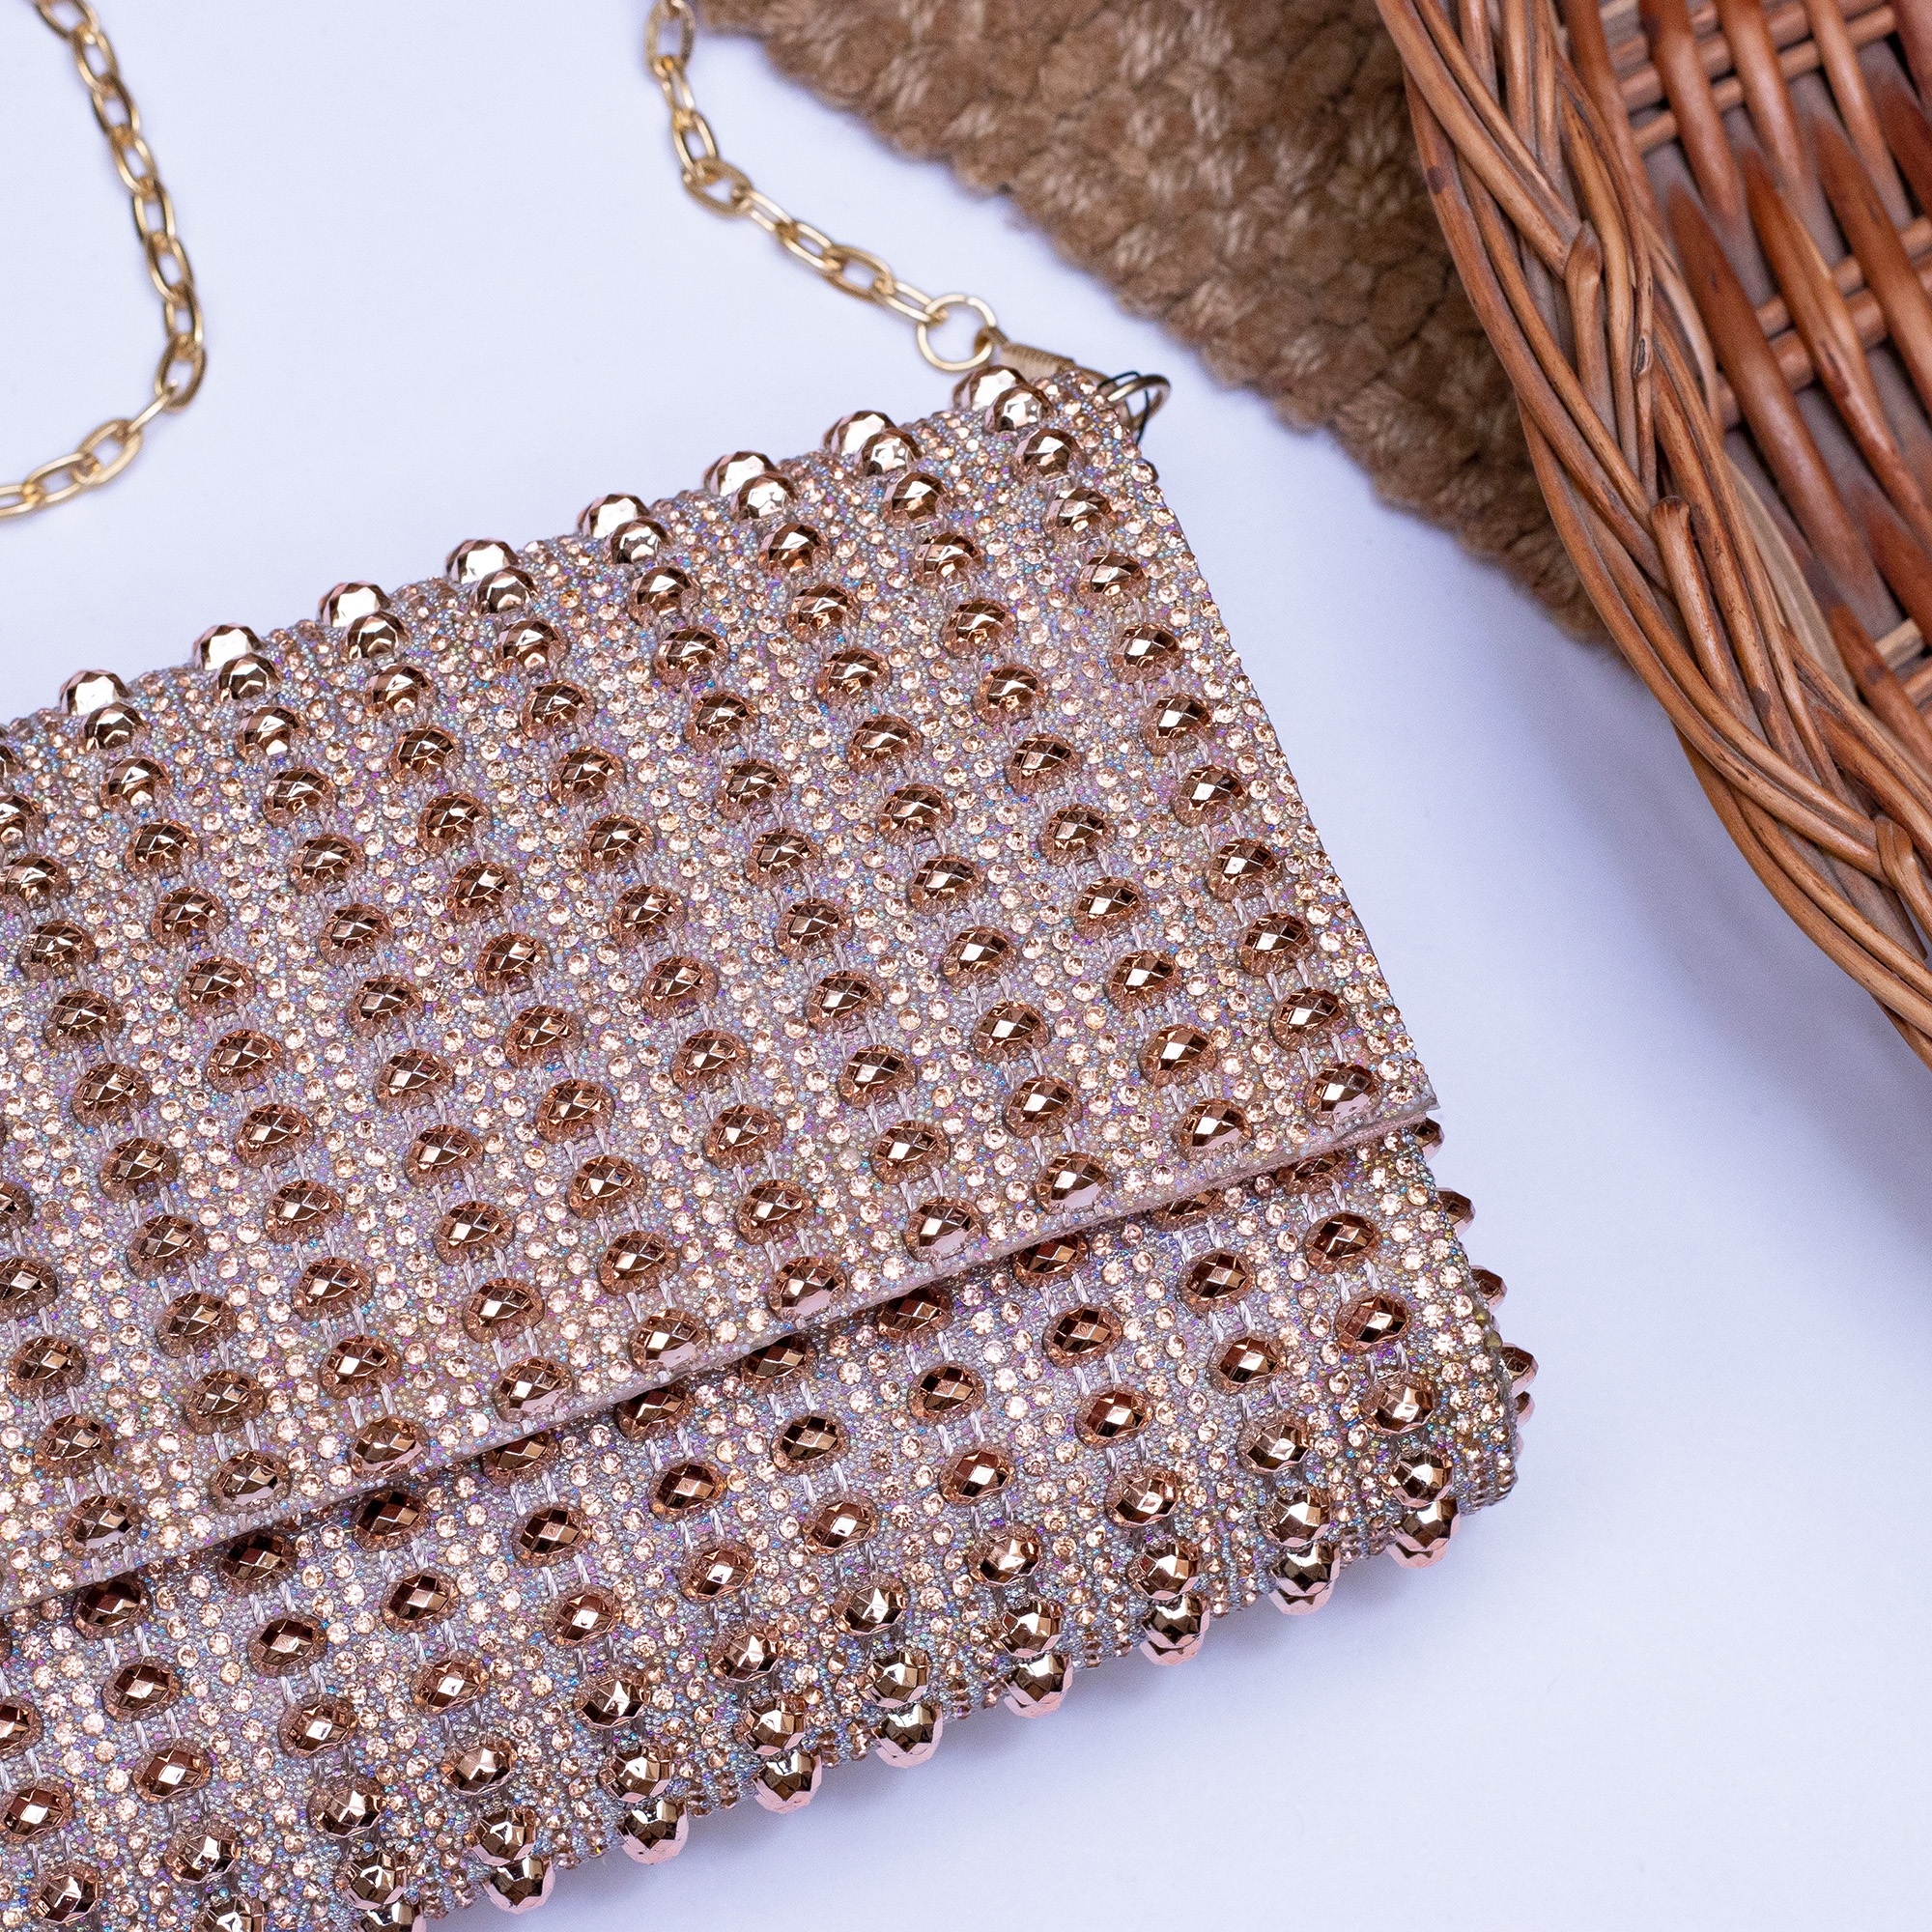 Studded copper clutch